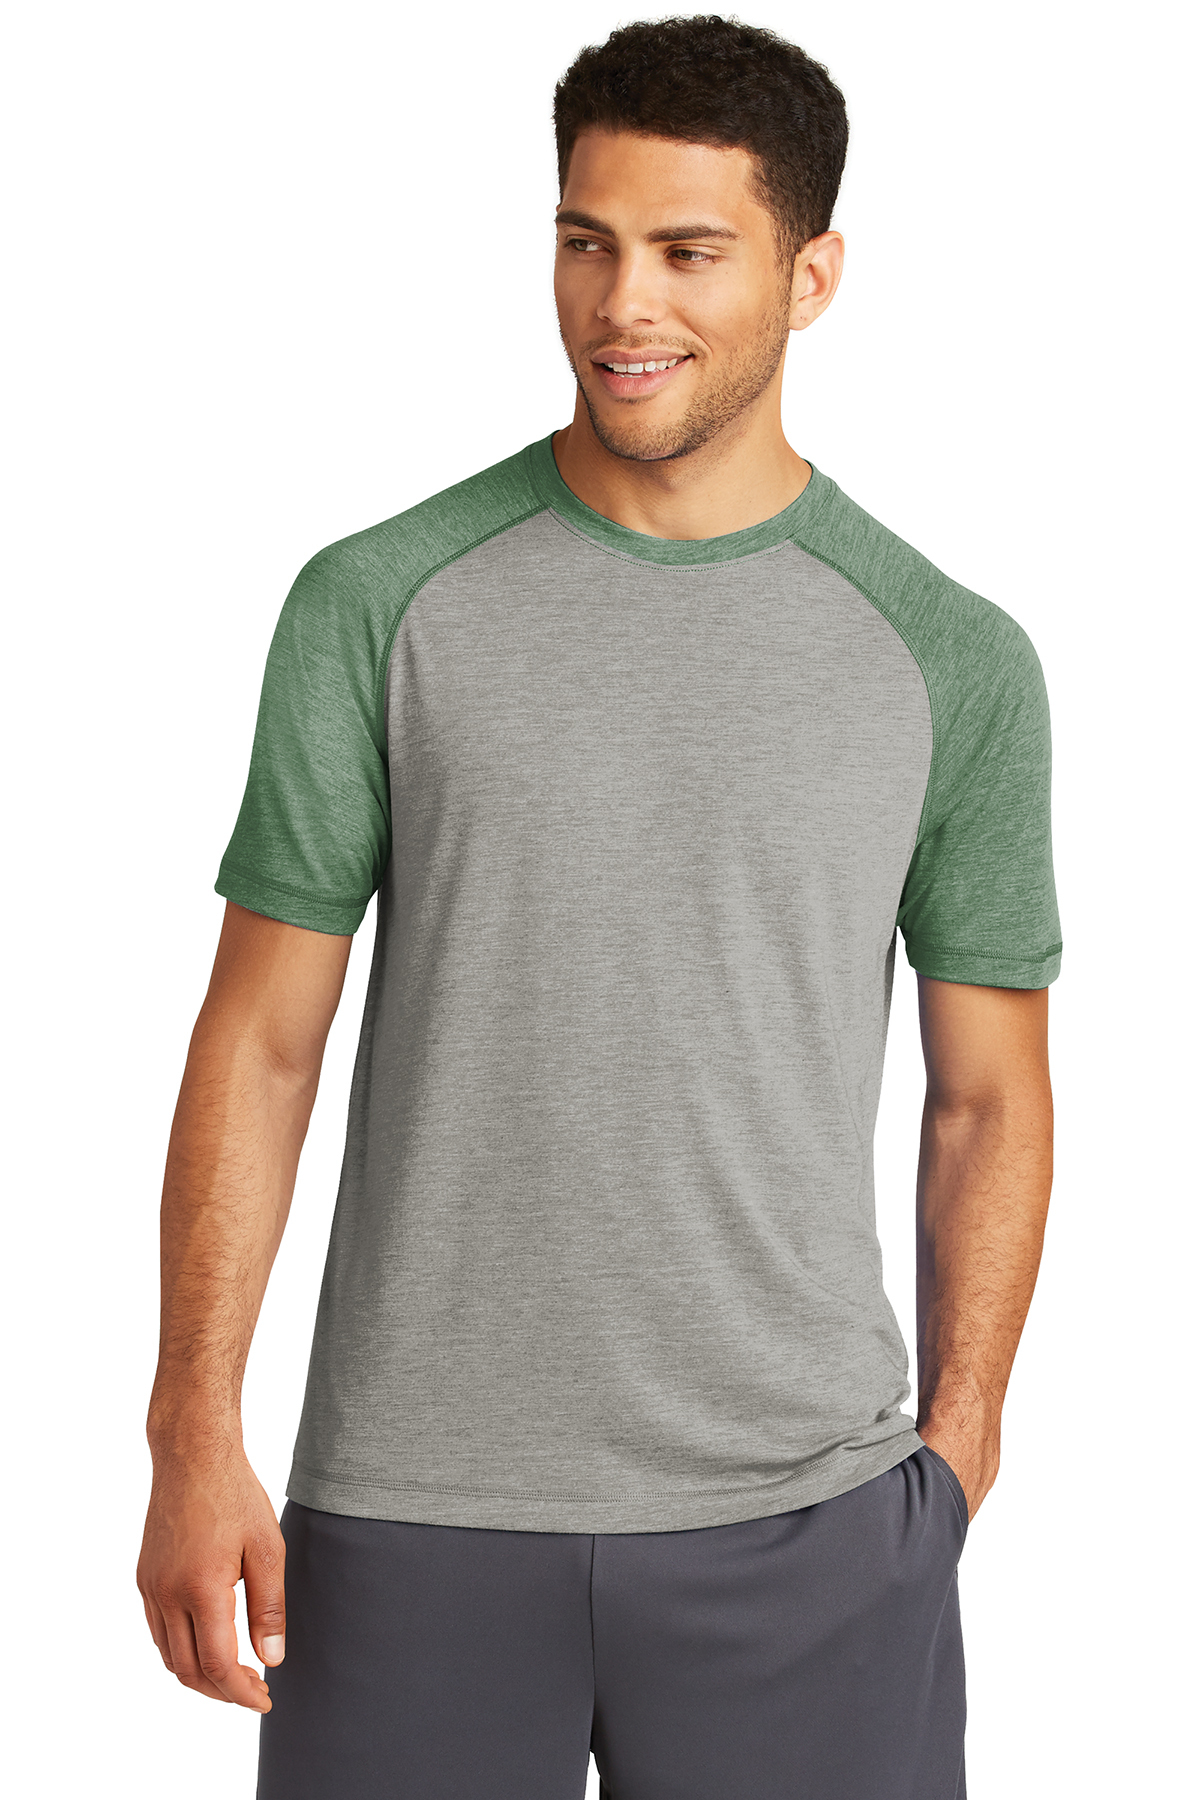 click to view Forest Green Heather-Light Grey Heather